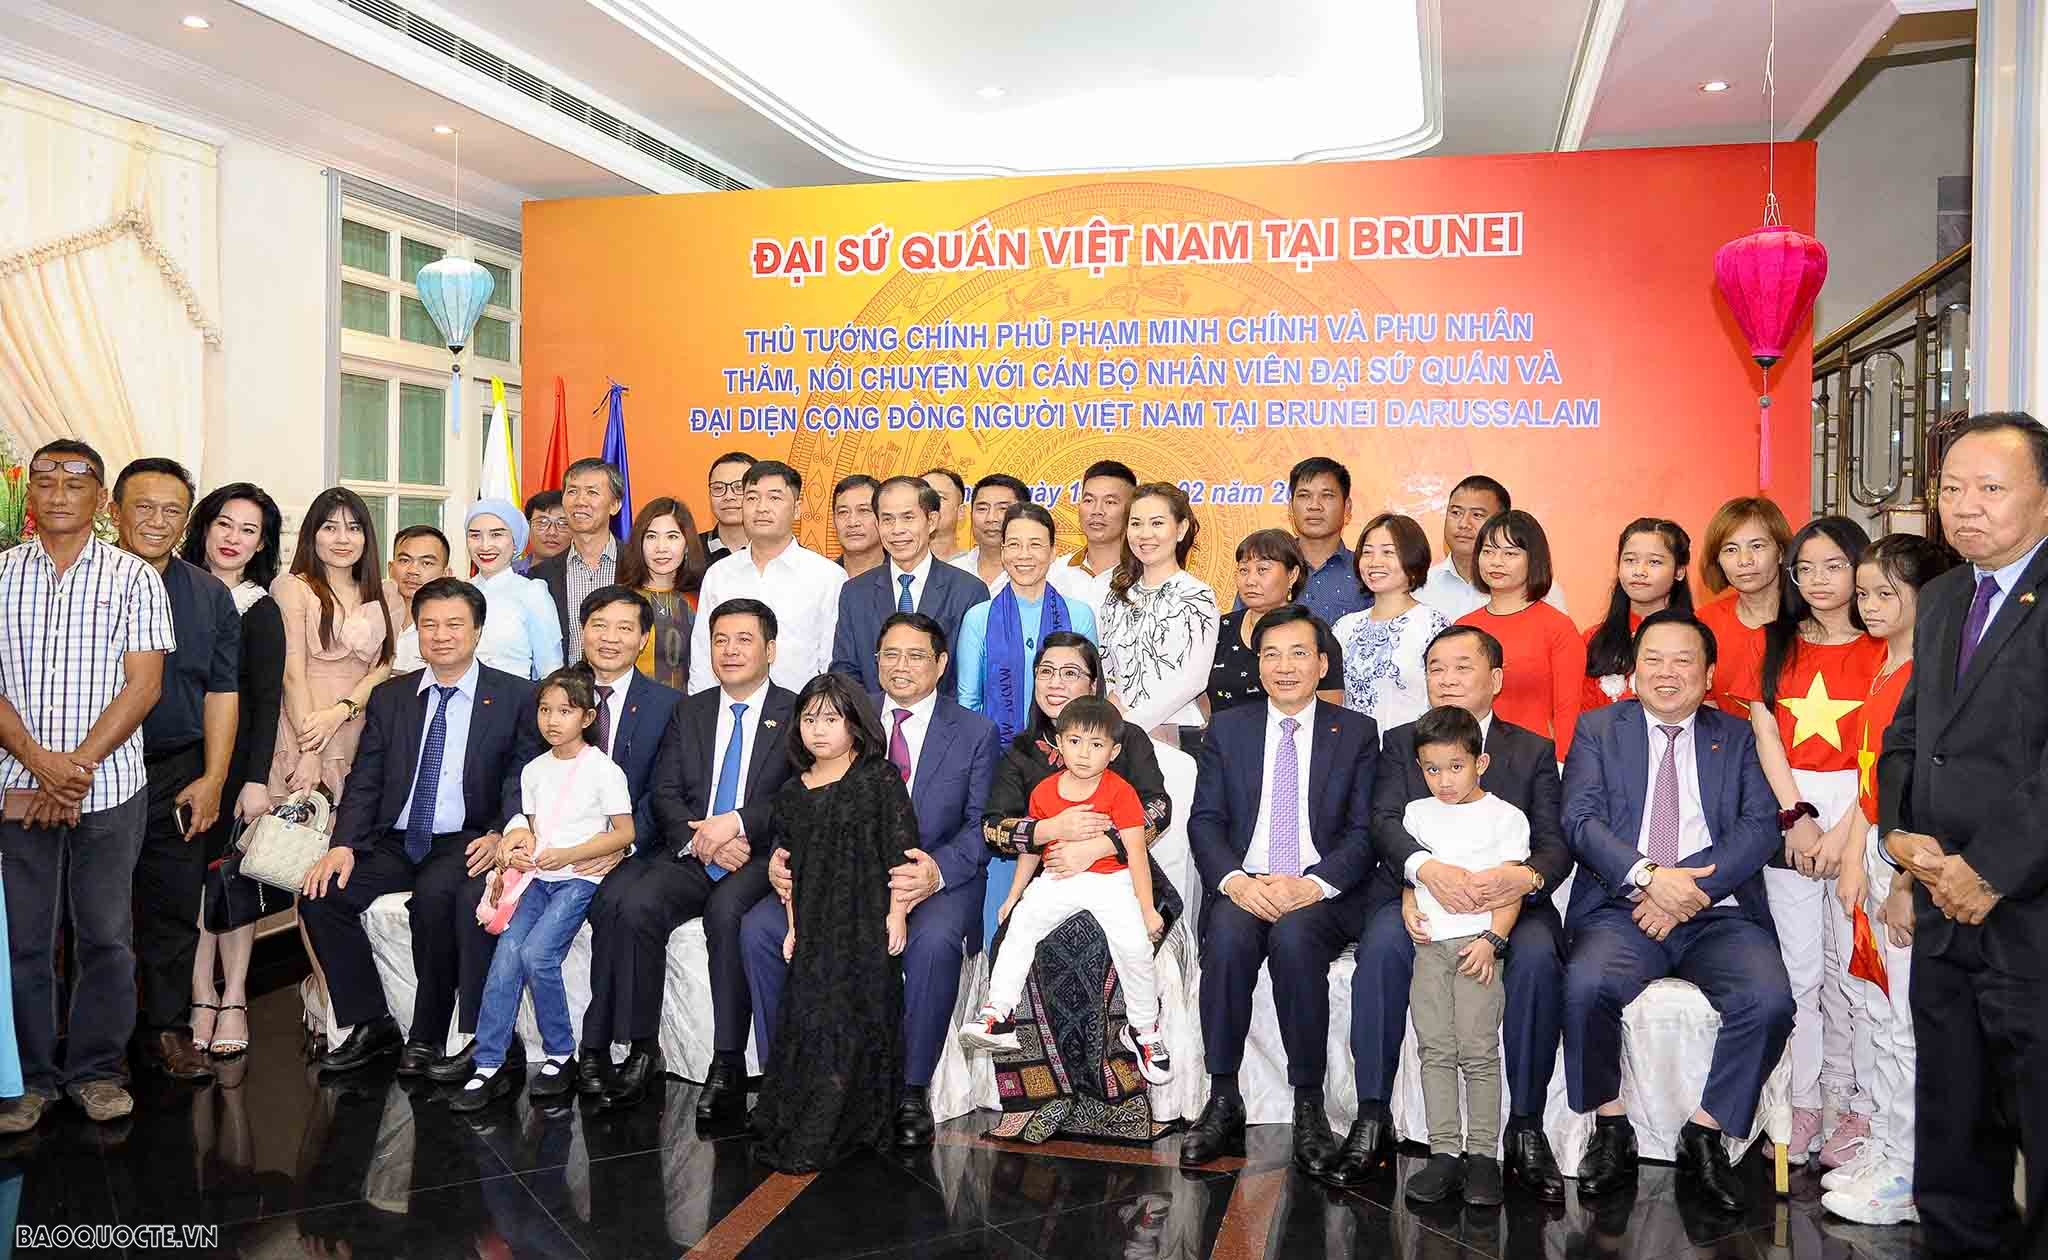 Prime Minister Pham Minh Chinh meets Vietnamese community in Brunei